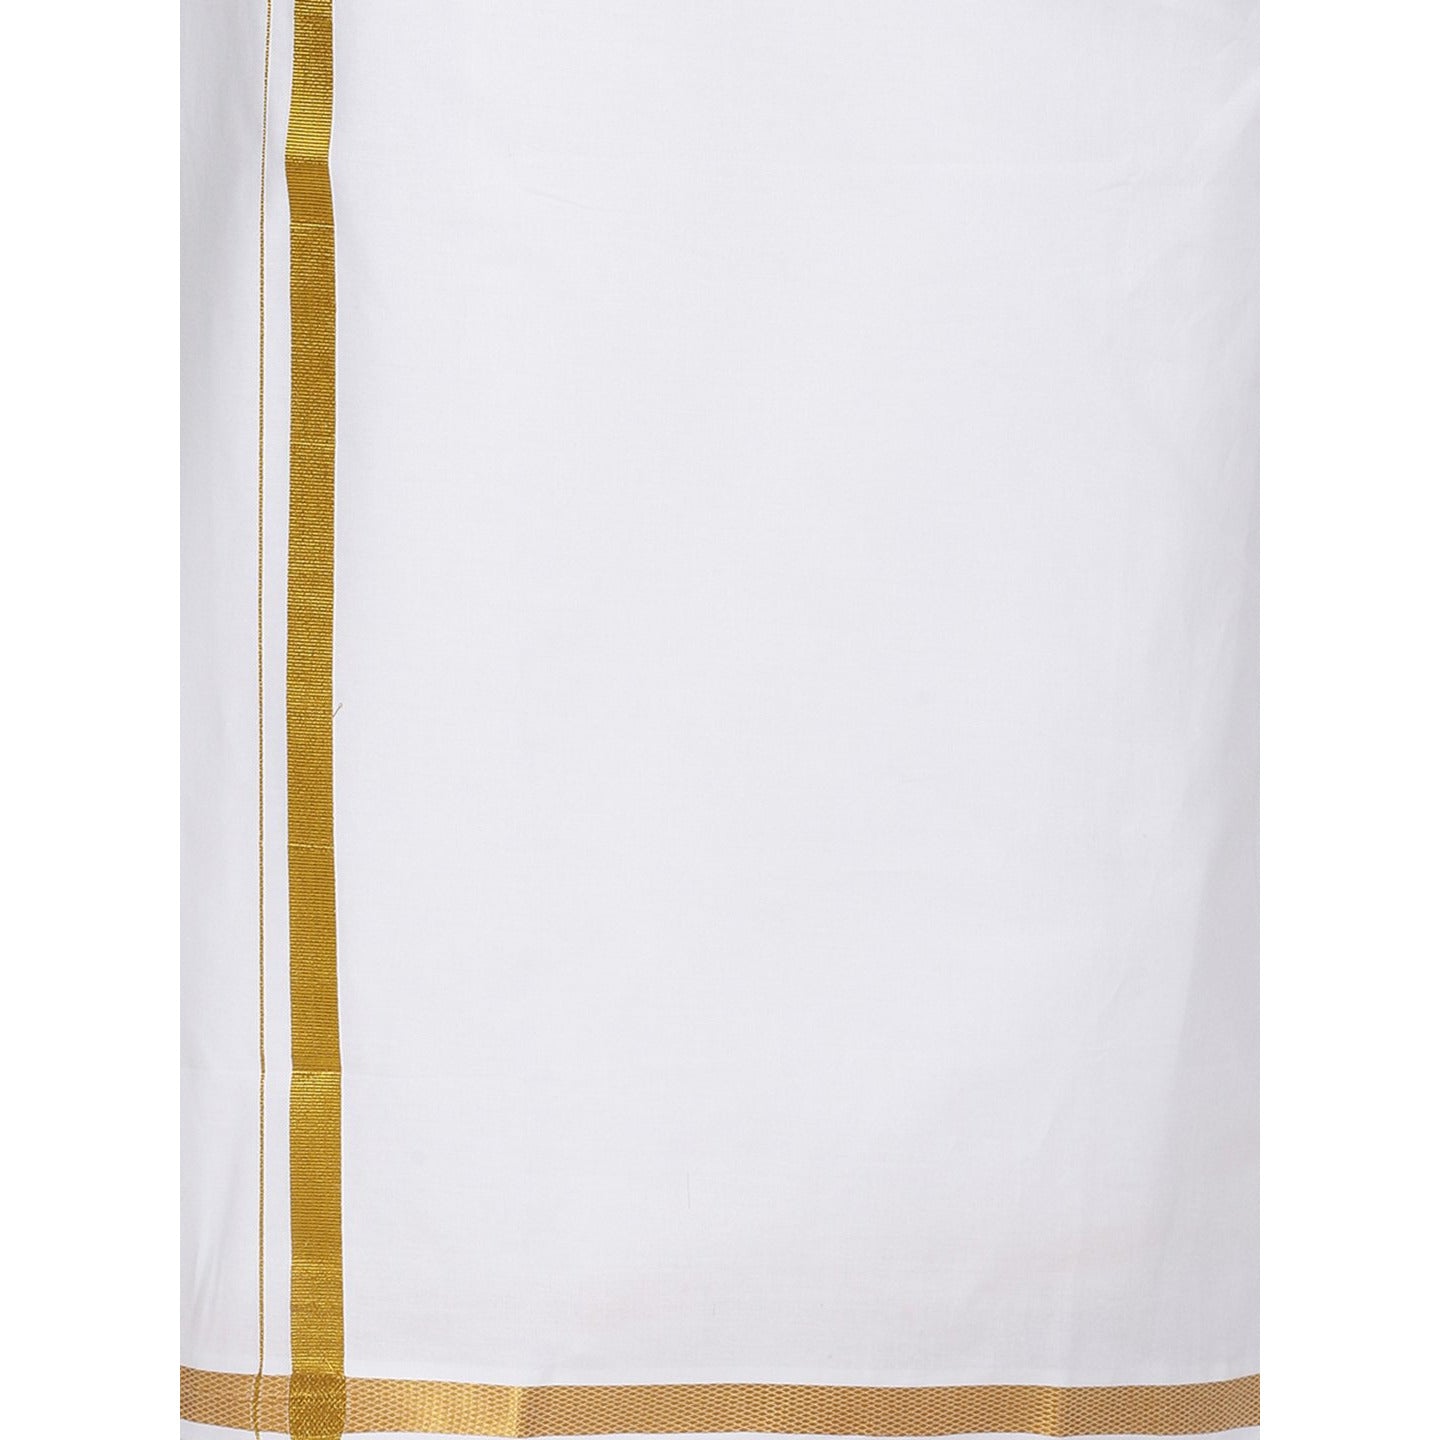 Mens Readymade Adjustable Dhoti White with Gold Jari 708-Zoom view